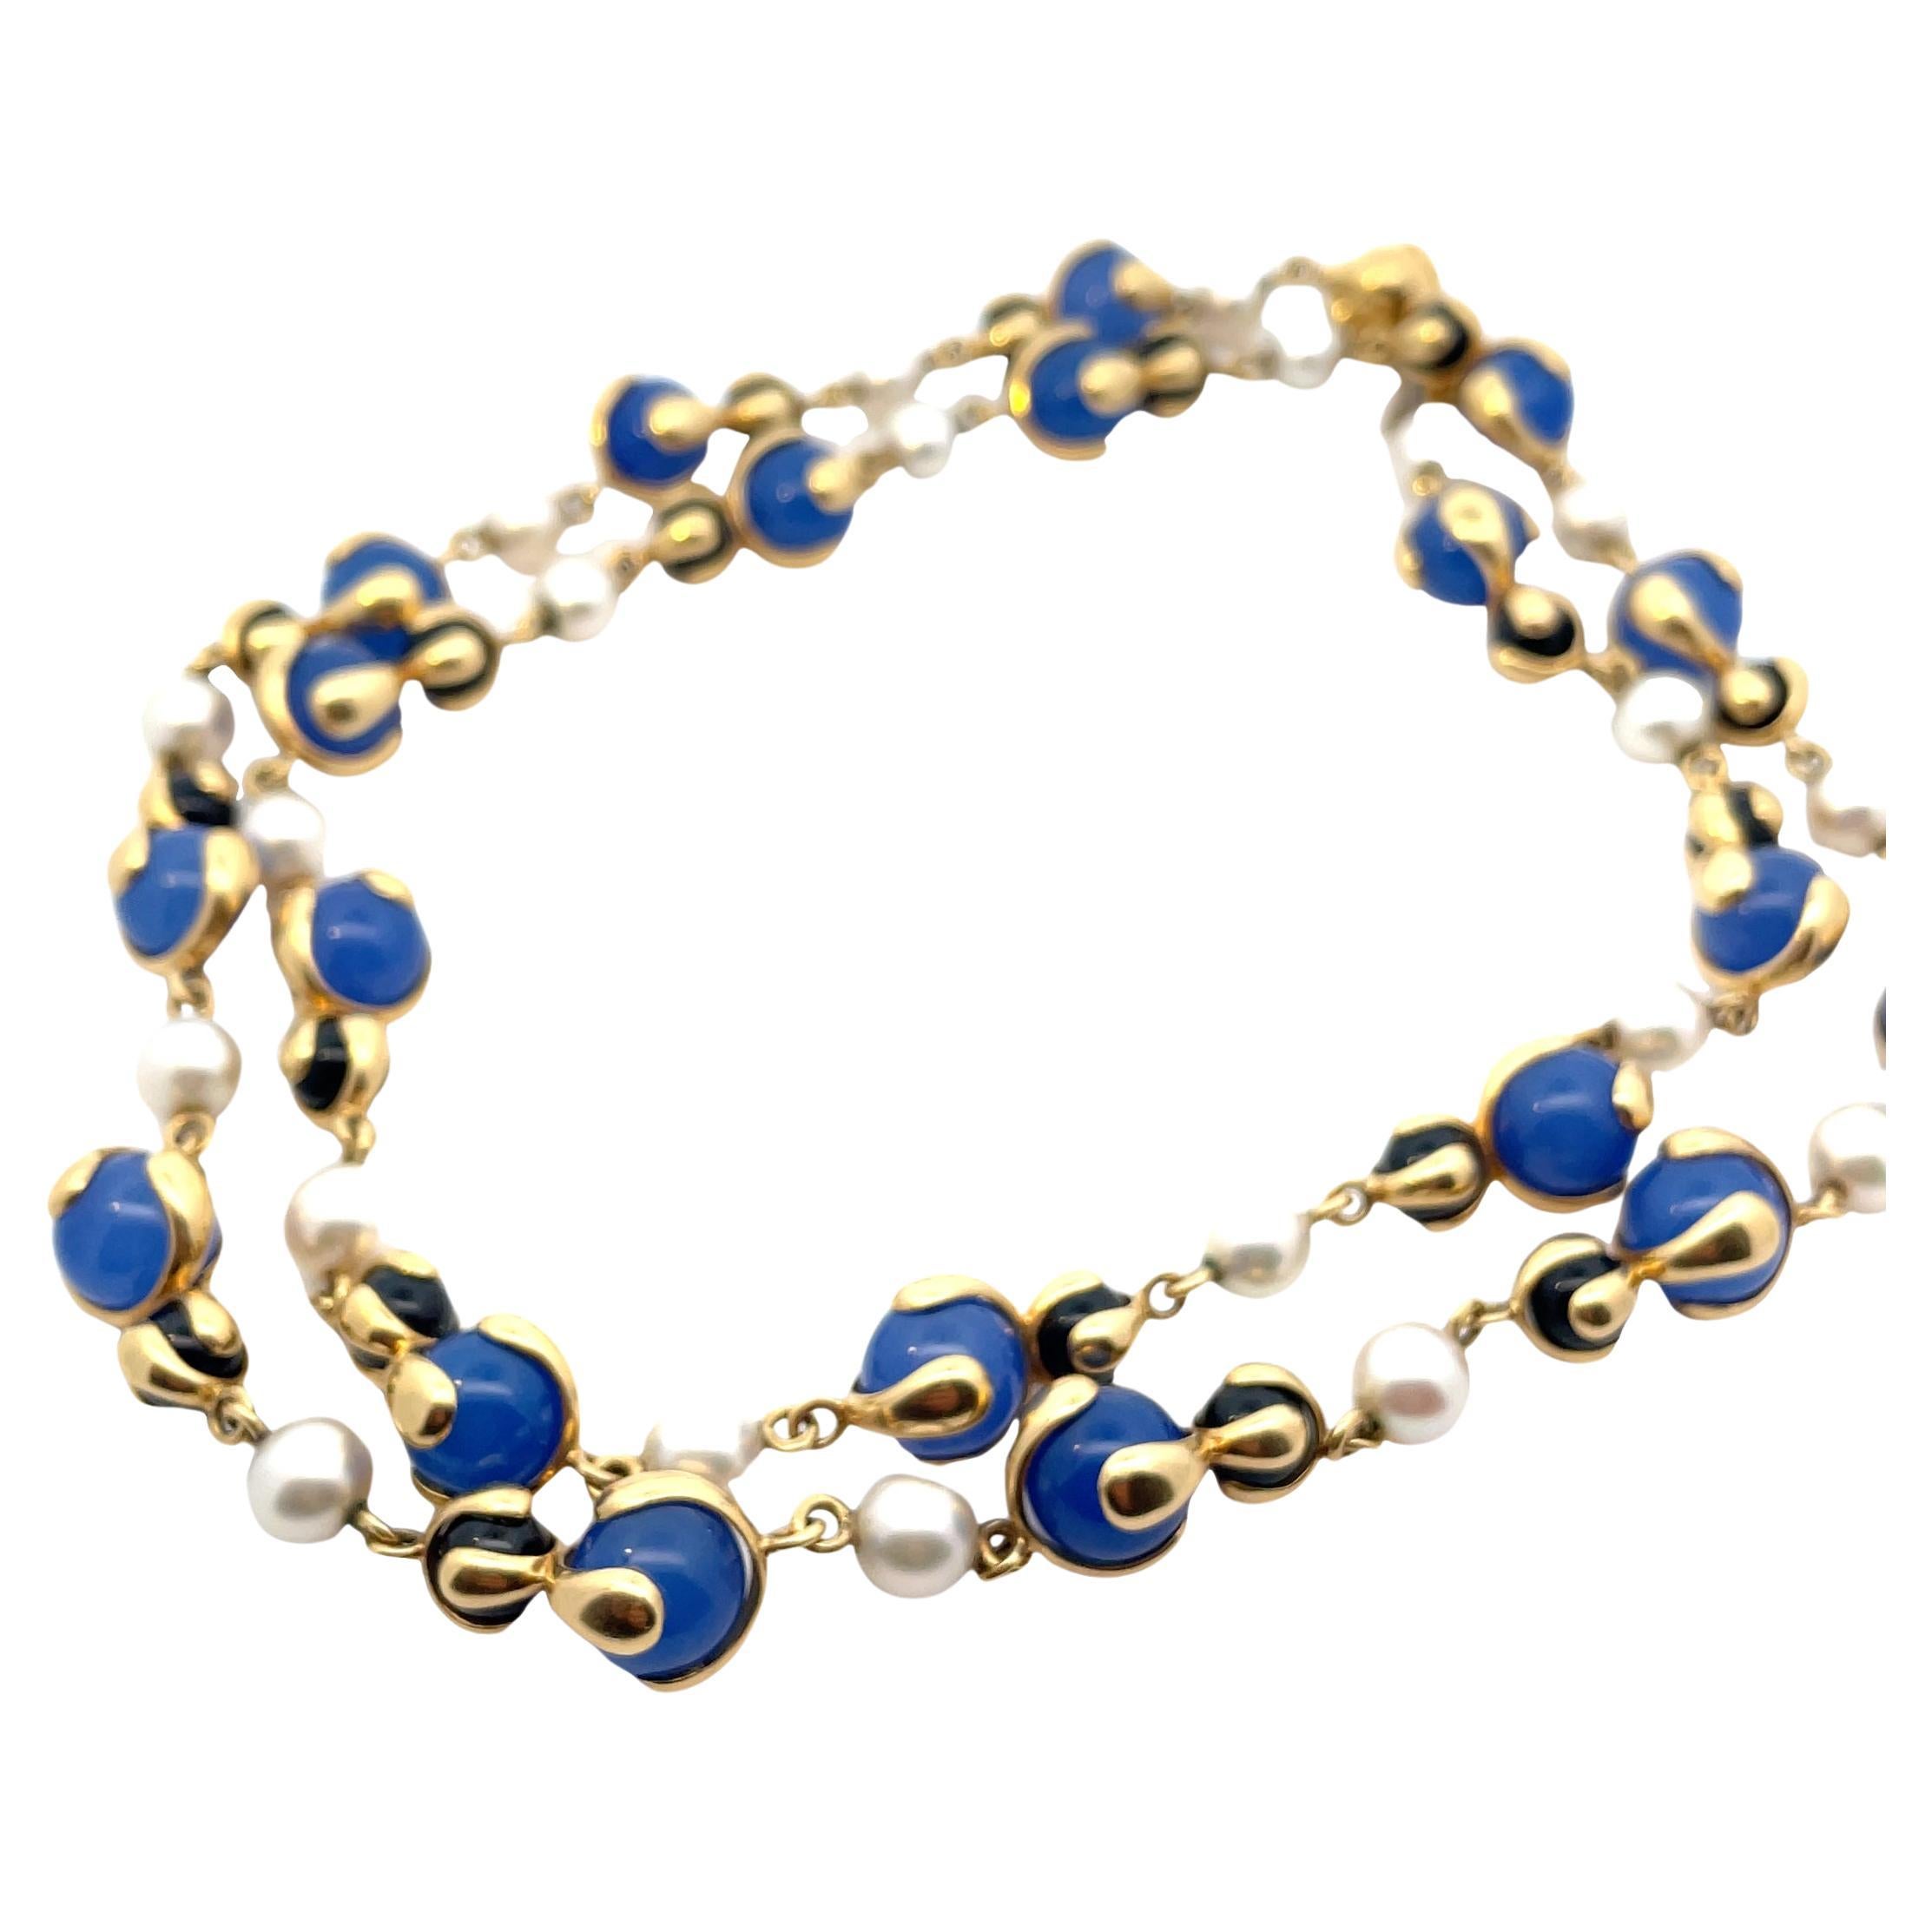 Vintage Long 18k gold necklace by Marina B, with 10.5 mm Blue Beads, 7mm onyx and 8mm pearls. Necklace is 84 cm long. Marked: Marina B, MB, Italy, 750. Weight - 131,5 grams.
Please note we have another one in Blue Beads and can be purchase togheter.
